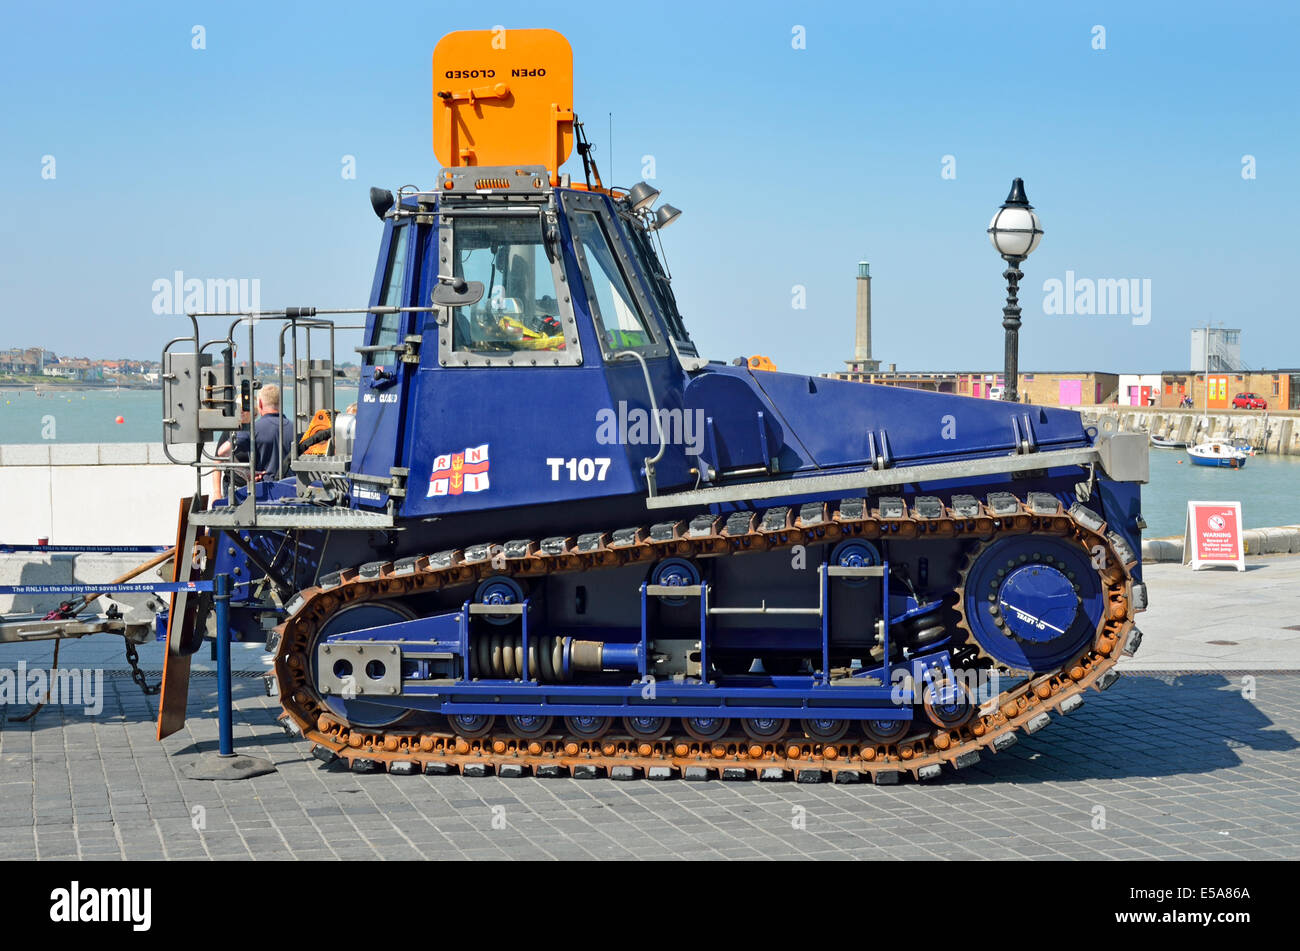 Margate, Kent, England, UK. Talus MB-H tractor for launching RNLI lifeboat Stock Photo